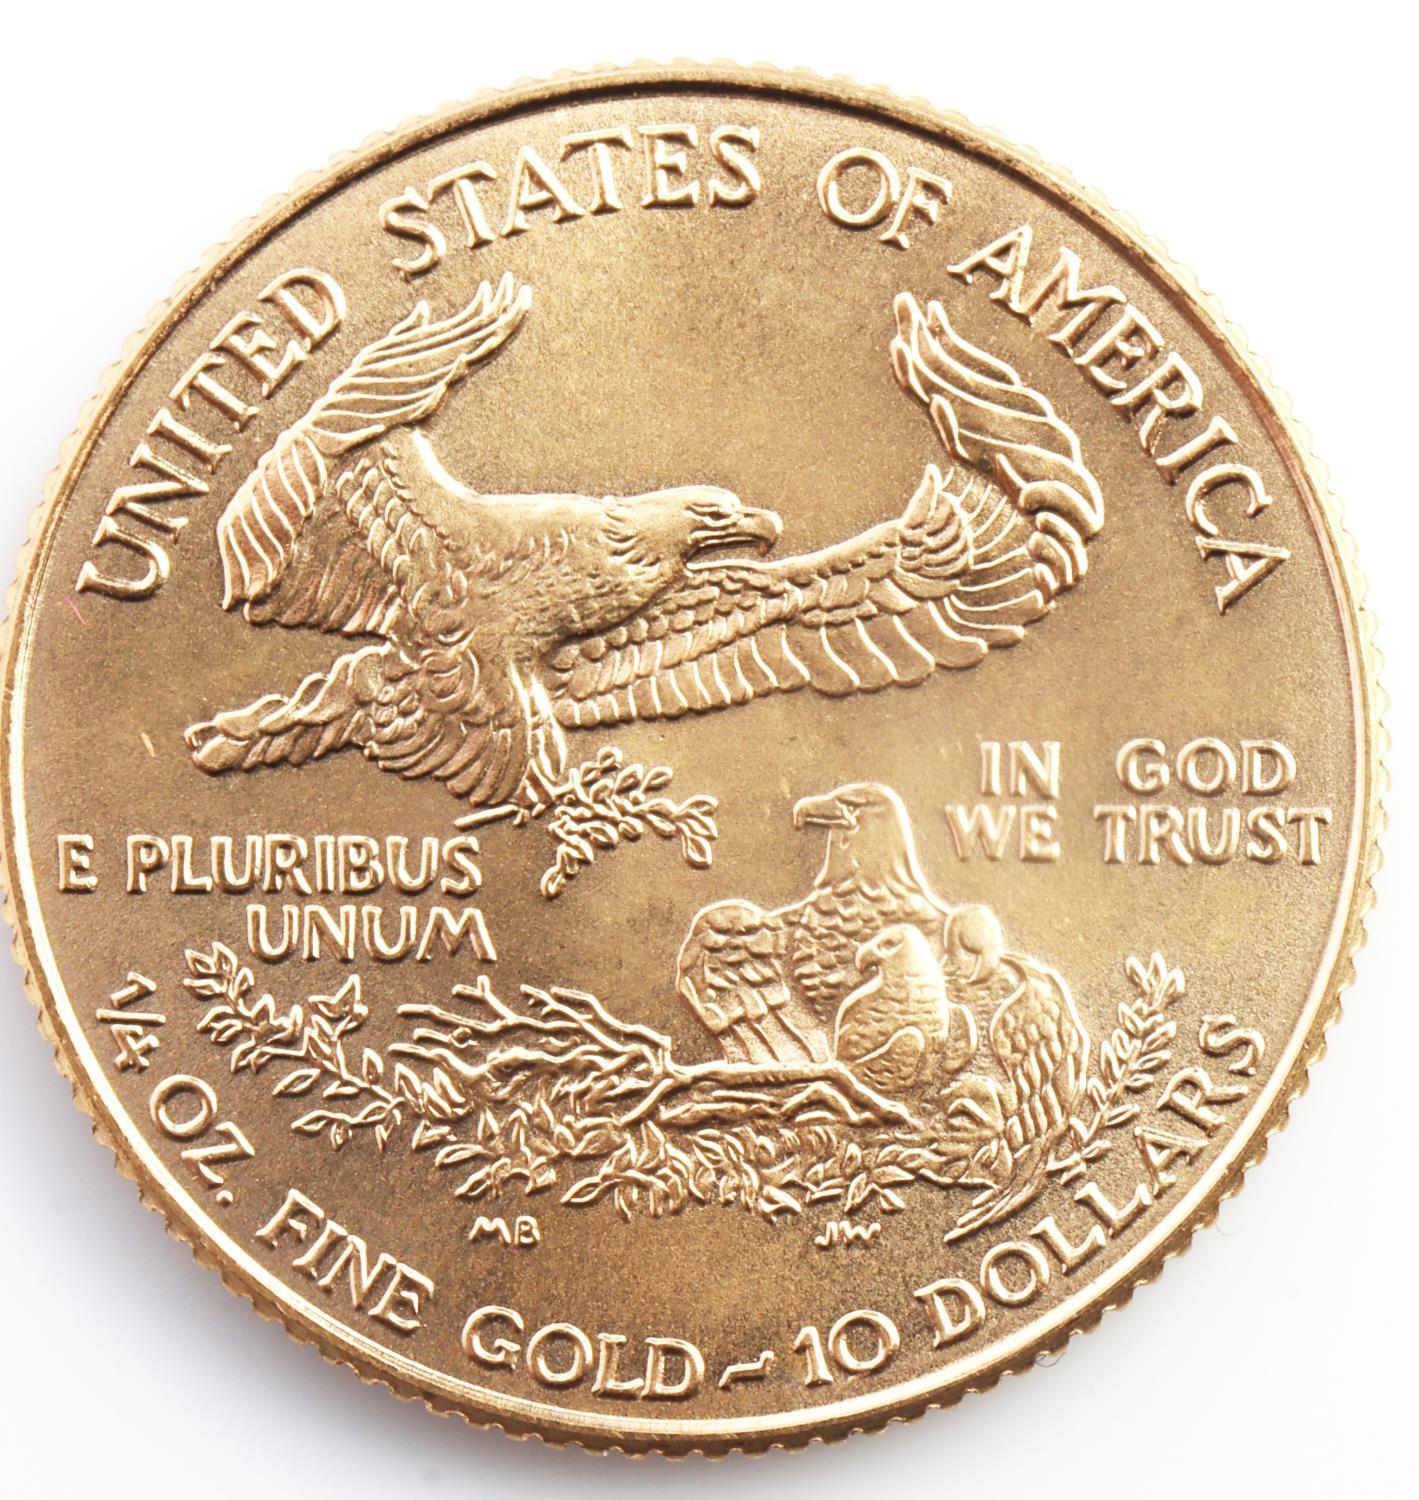 1998 1/4 AMERICAN GOLD EAGLE GOLD COIN